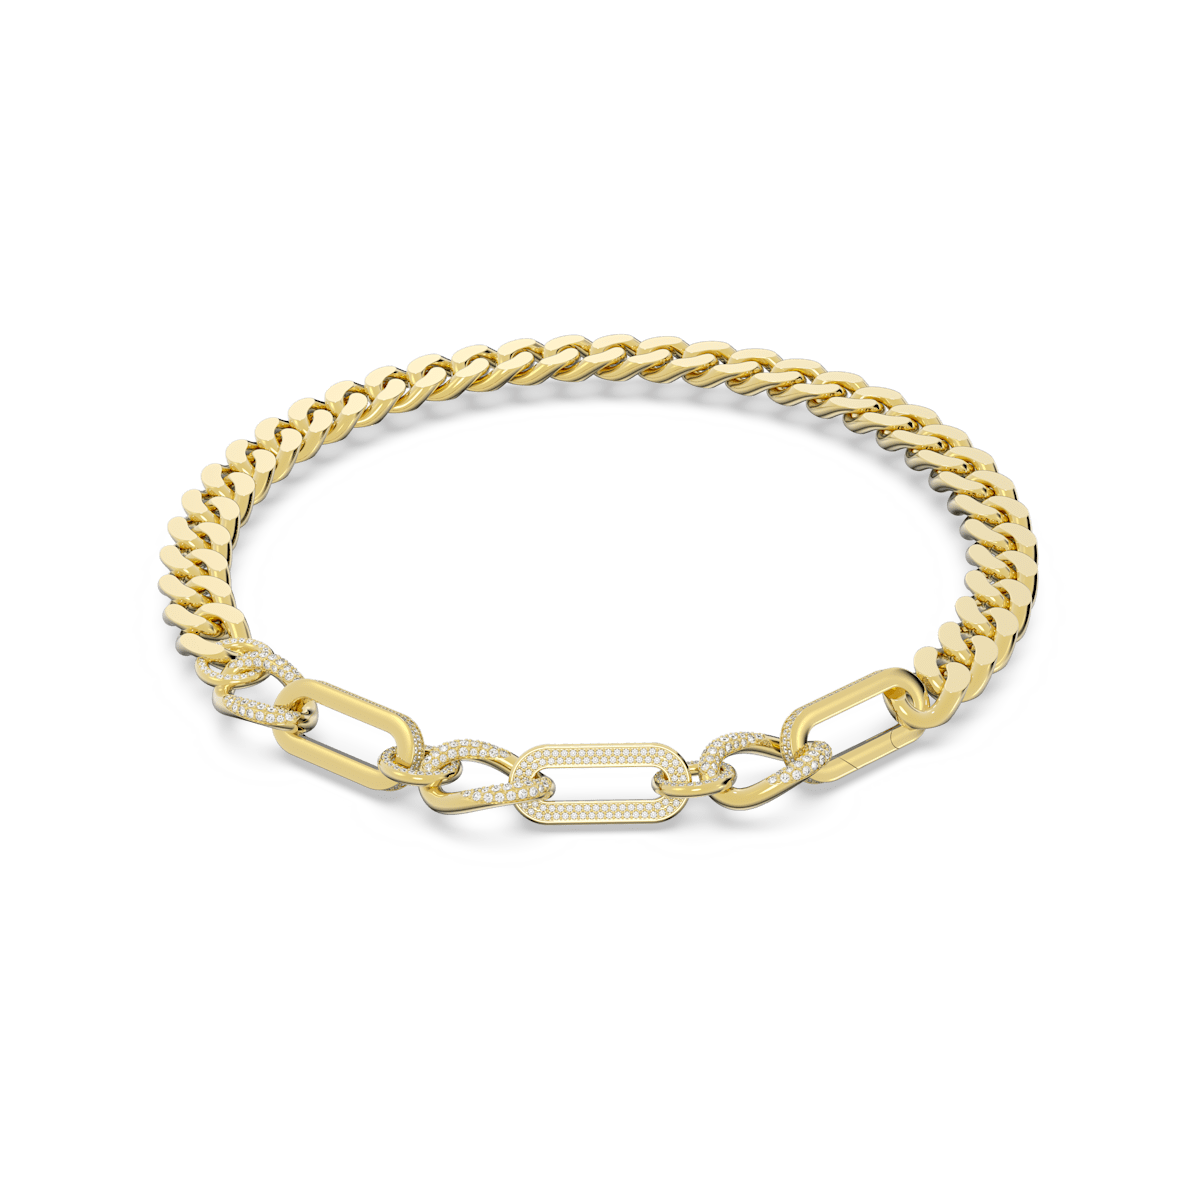 Dextera necklace, Statement, Mixed links, White, Gold-tone plated